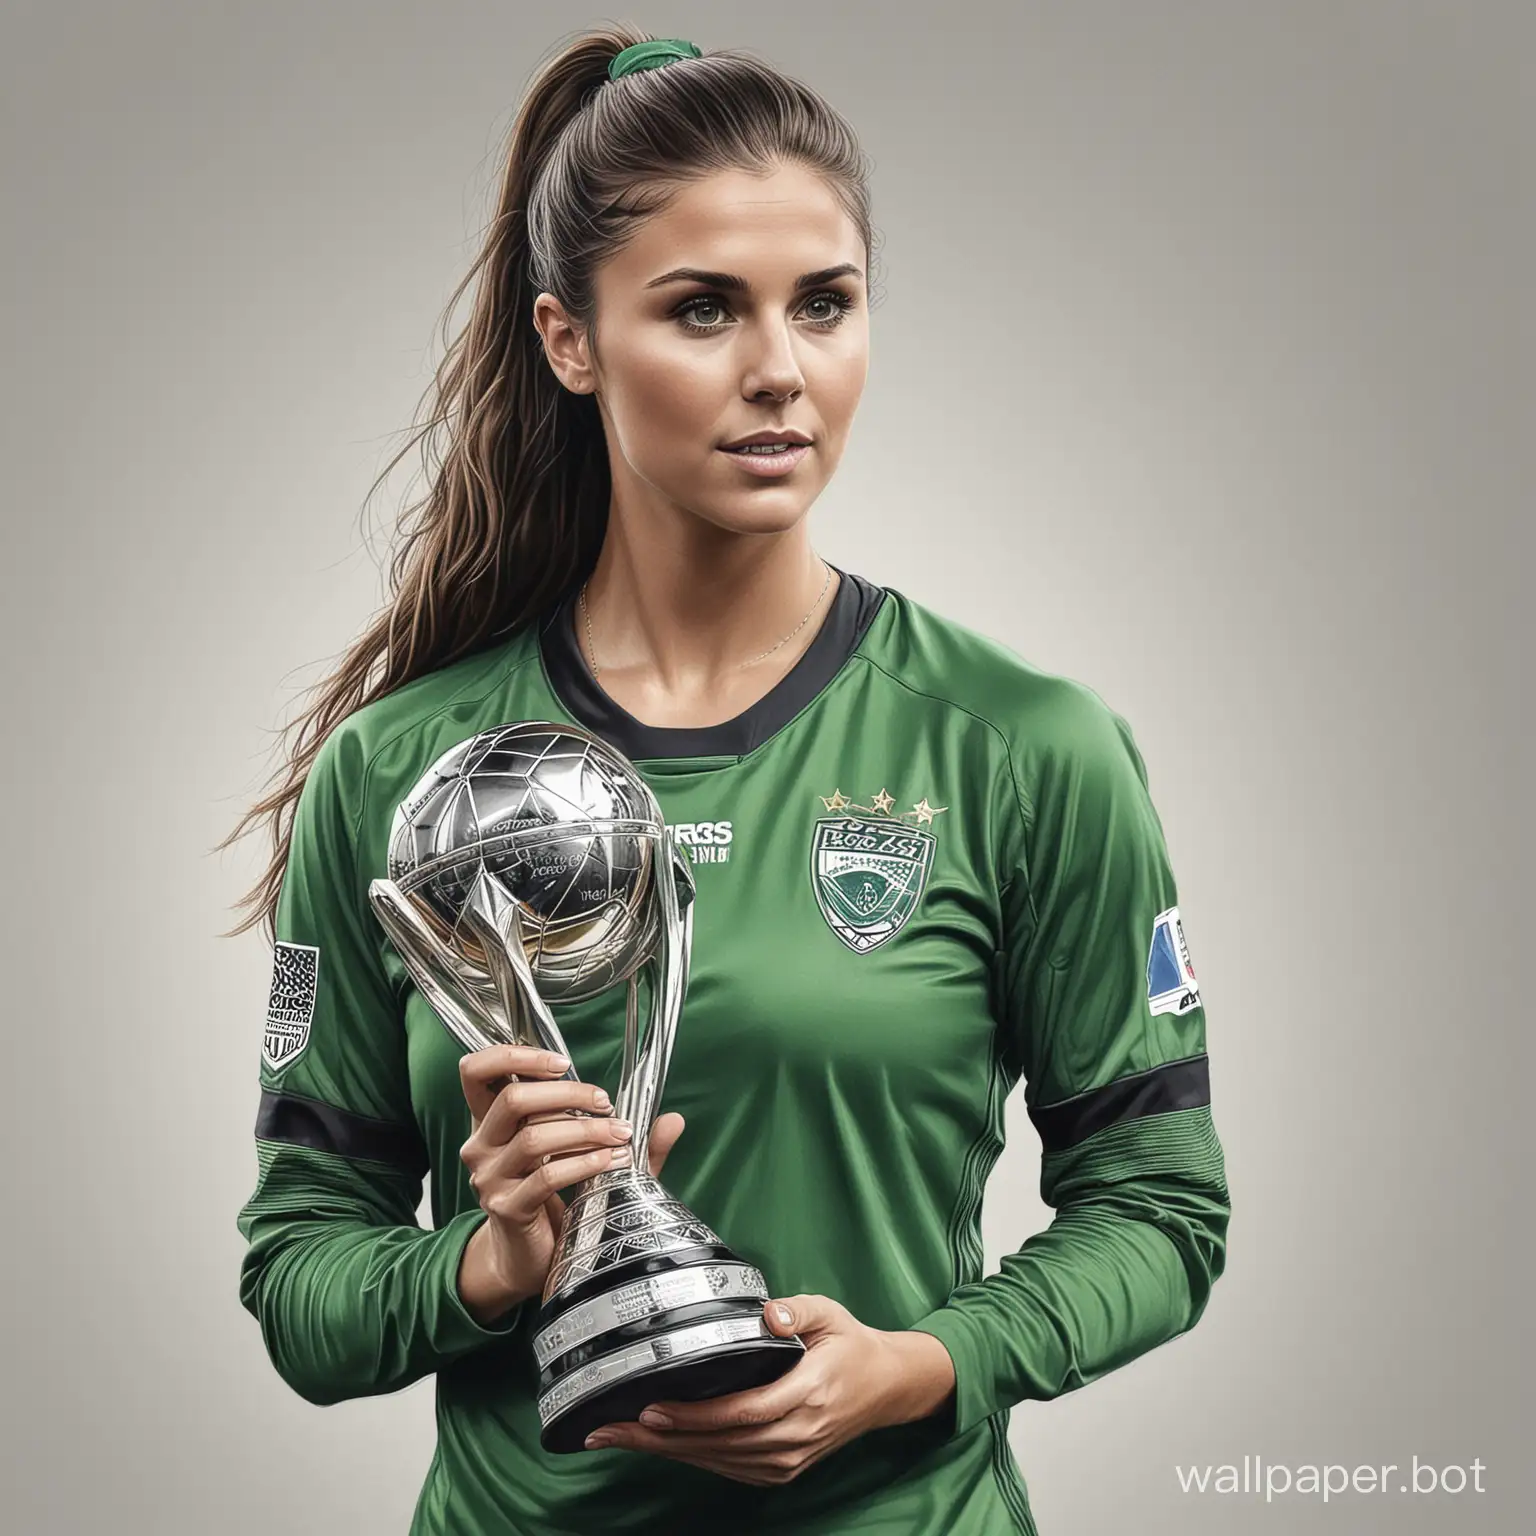 sketch of Alex Morgan 26 years old dark hair 6 breast size narrow waist in green-black football uniform holding a large titanium champions cup white background pencil drawing